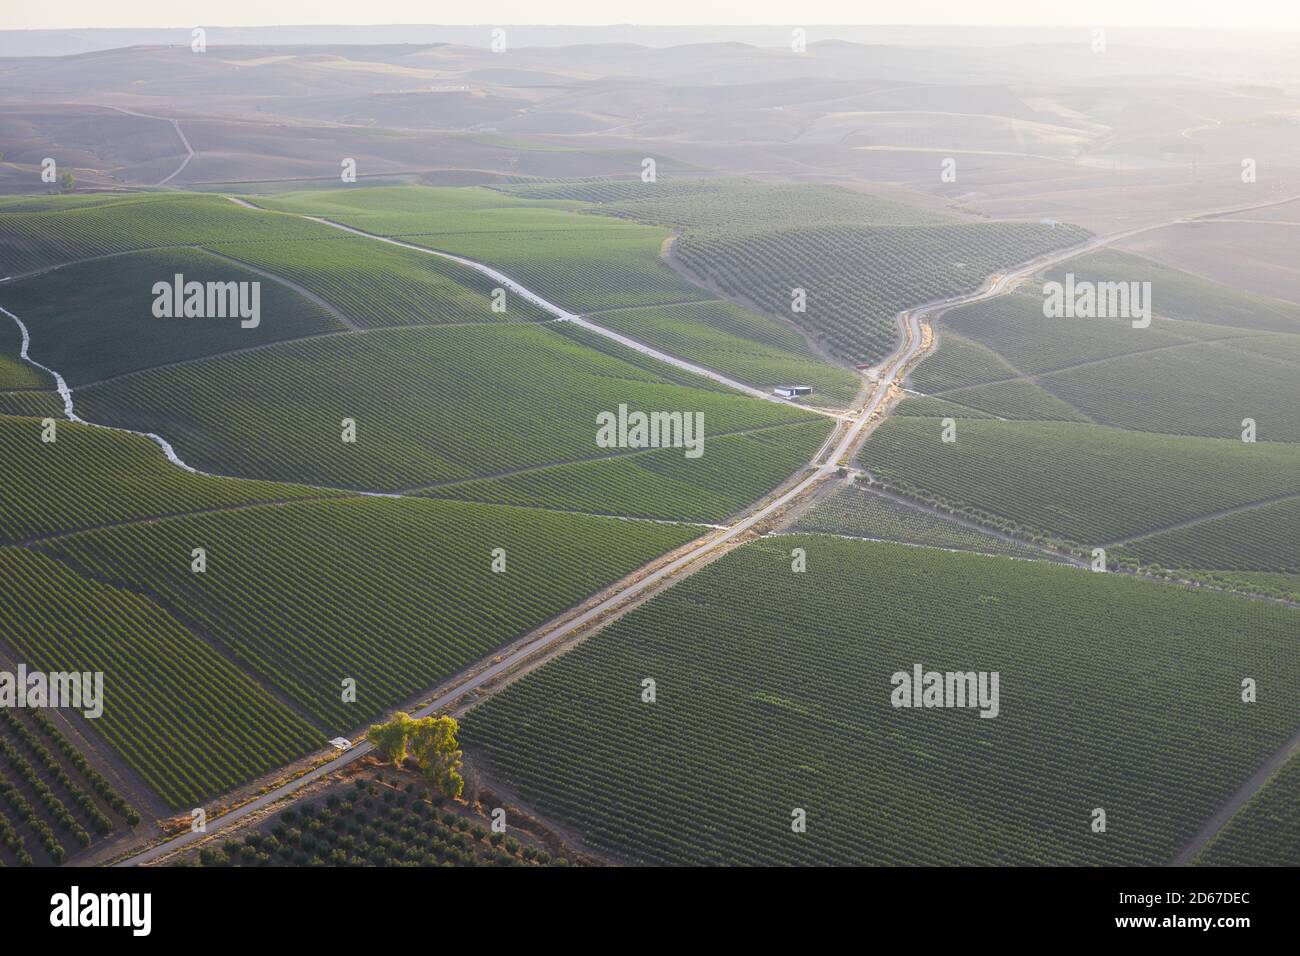 Furrows on a green farm seen from above Stock Photo